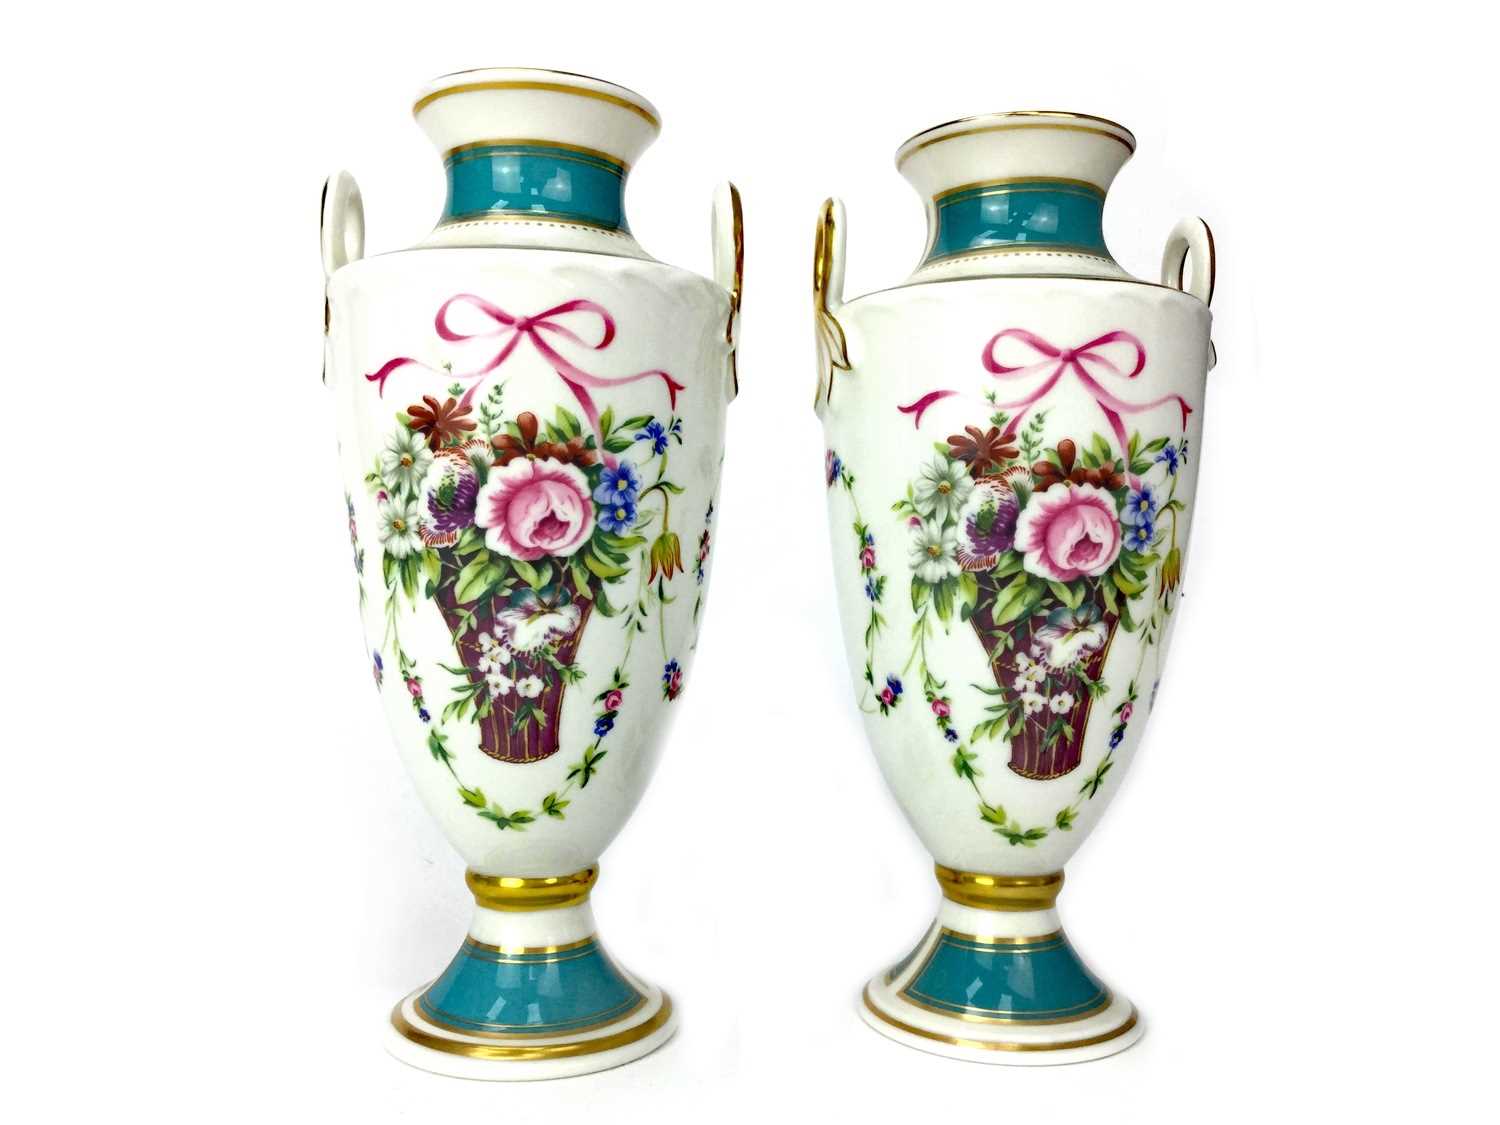 Lot 1020 - A PAIR OF LATE 20TH CENTURY MINTON VASES